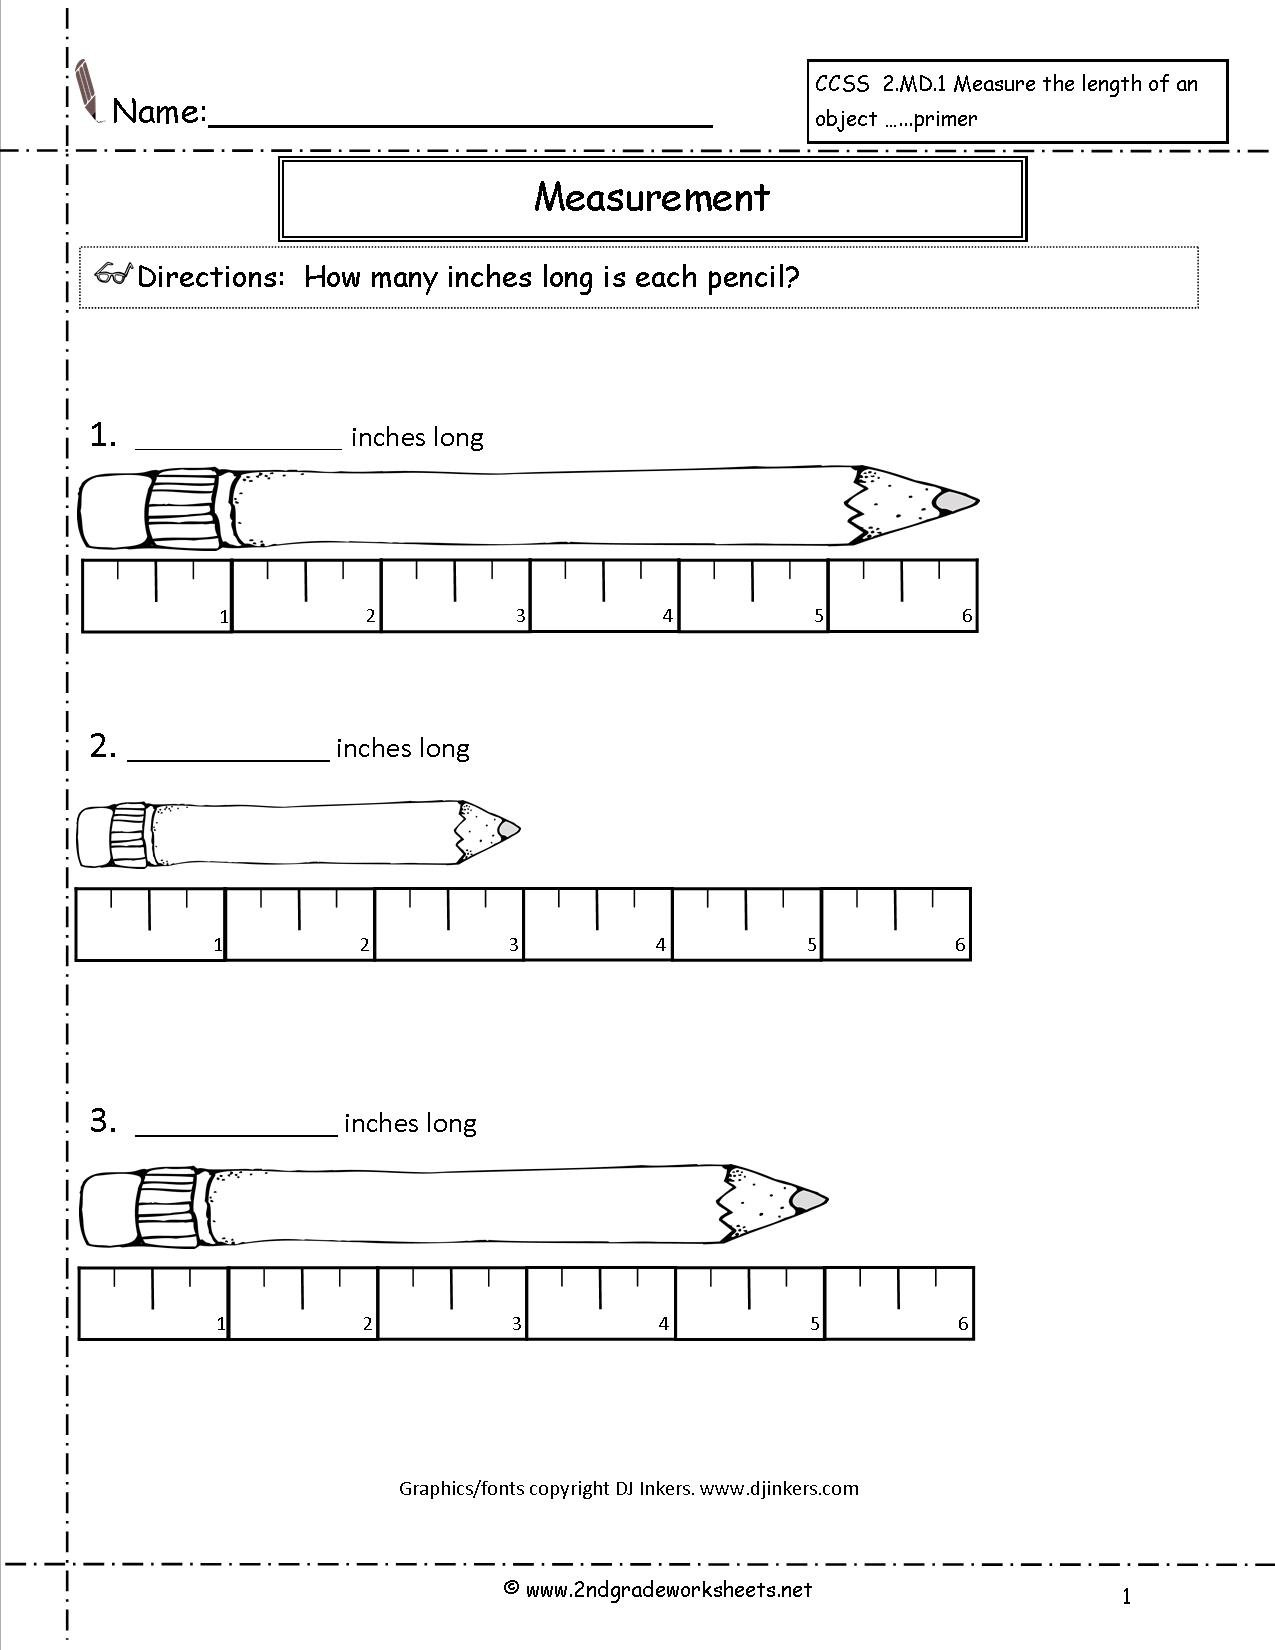 Ccss 2Md1 Worksheets Measuring Worksheets For Measuring To The Nearest Half Inch Worksheets